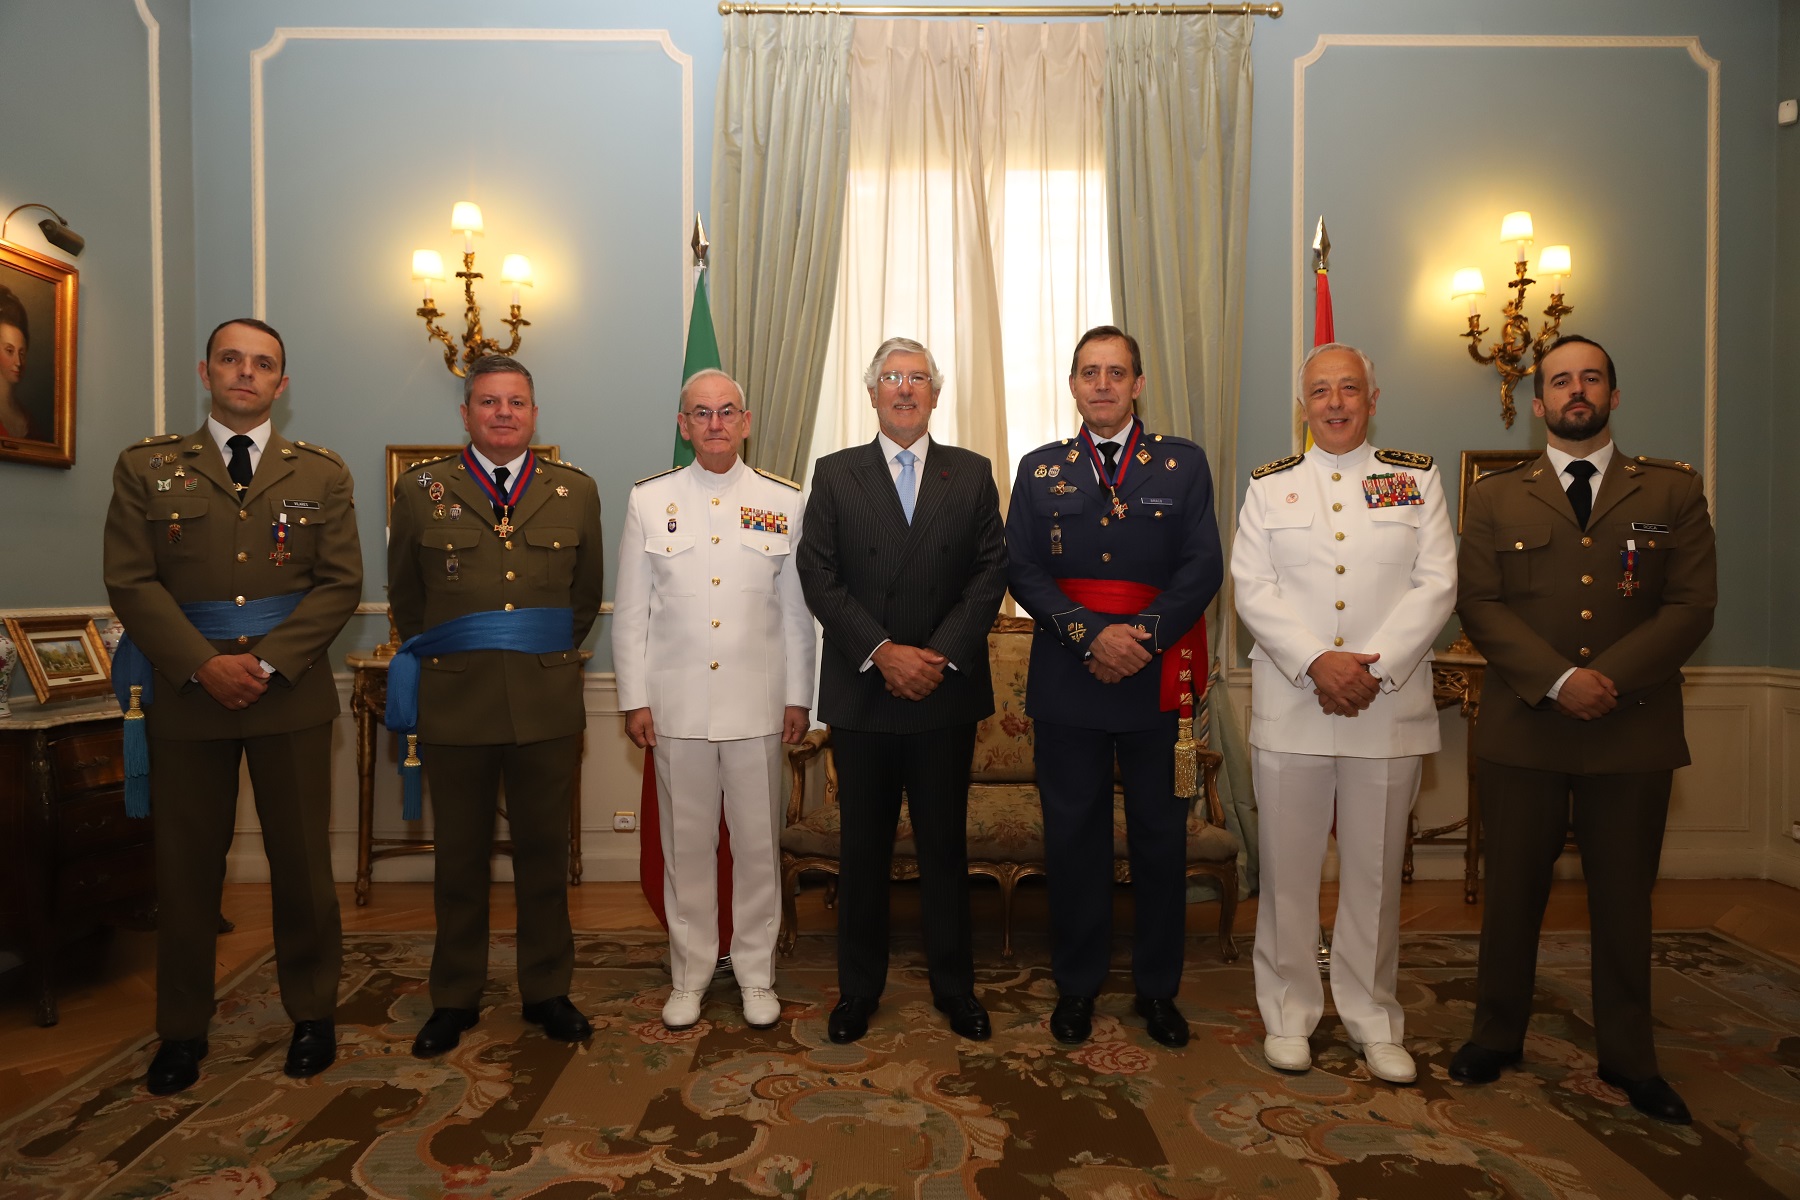 Ambasador and ESP CHOD along with the awarded military